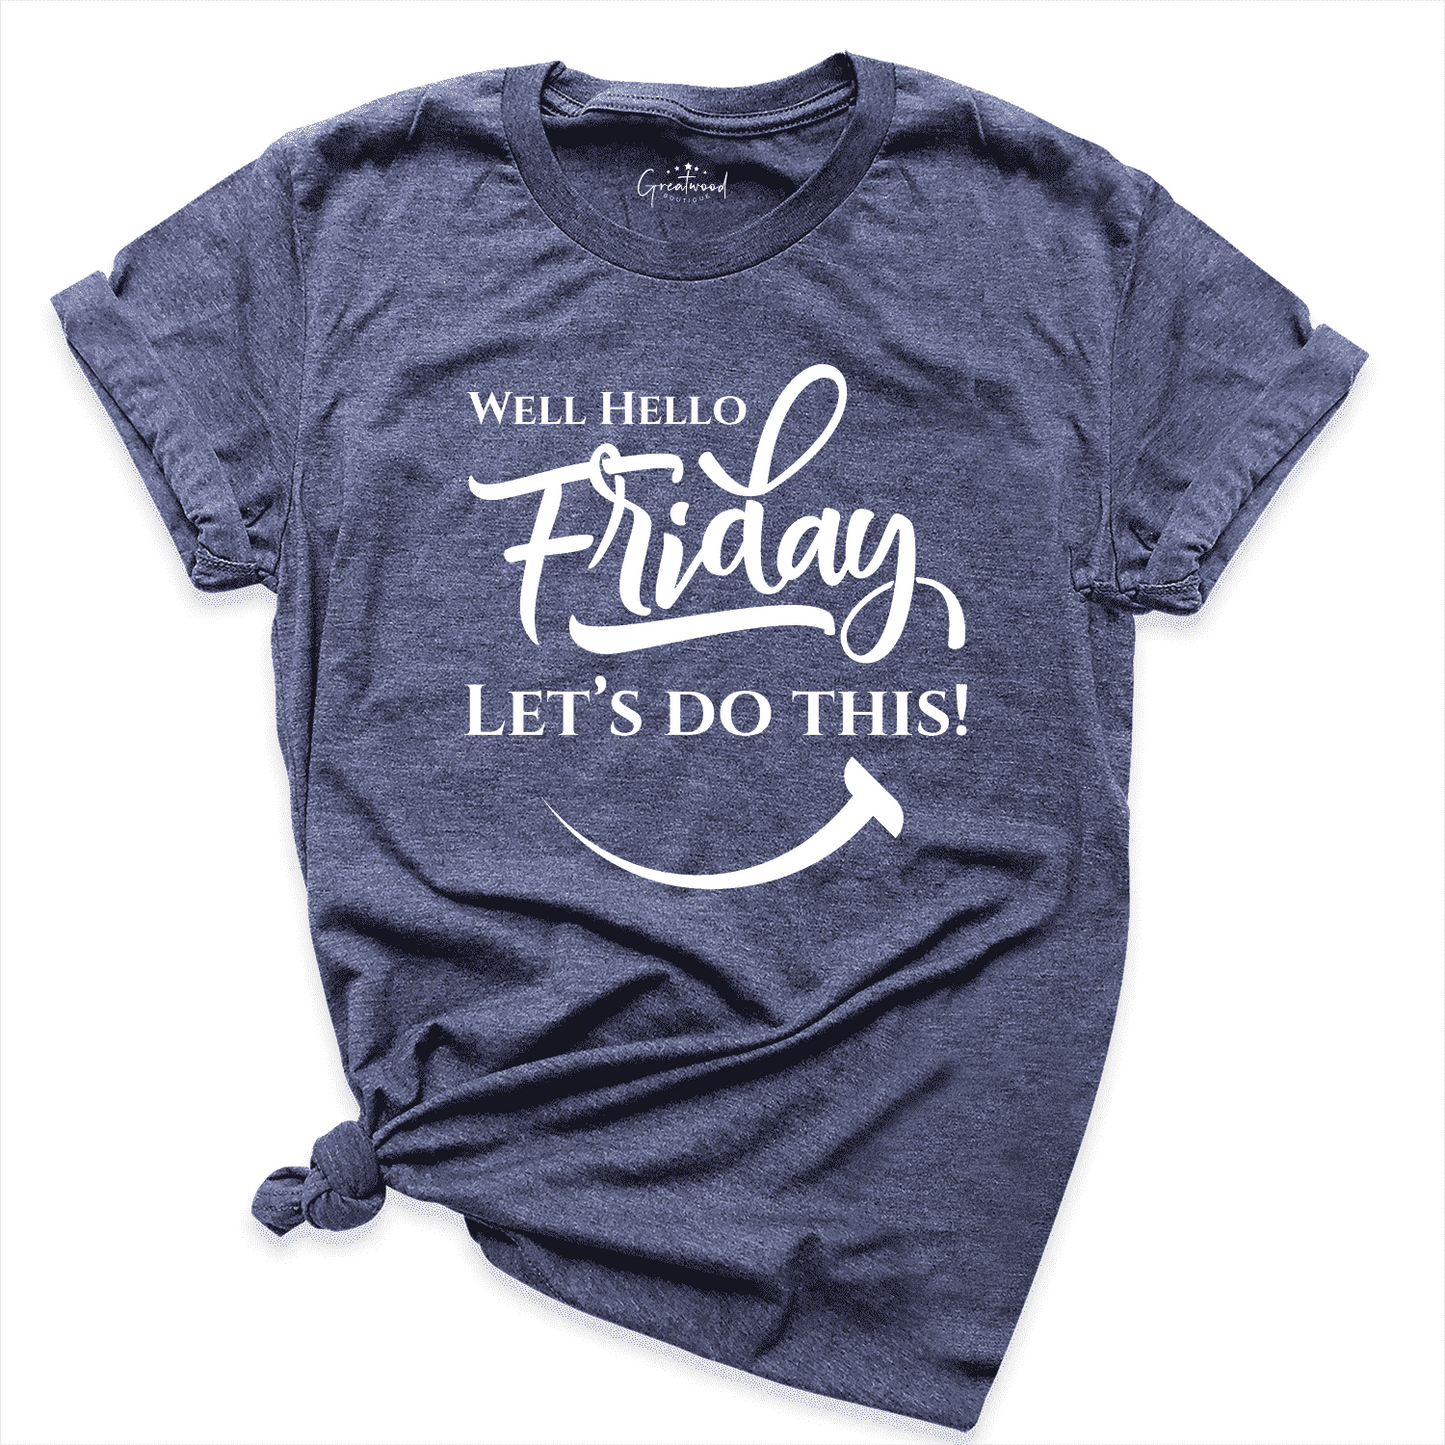 Well Hello Friday Let’s Do This Shirt Navy - Greatwood Boutique